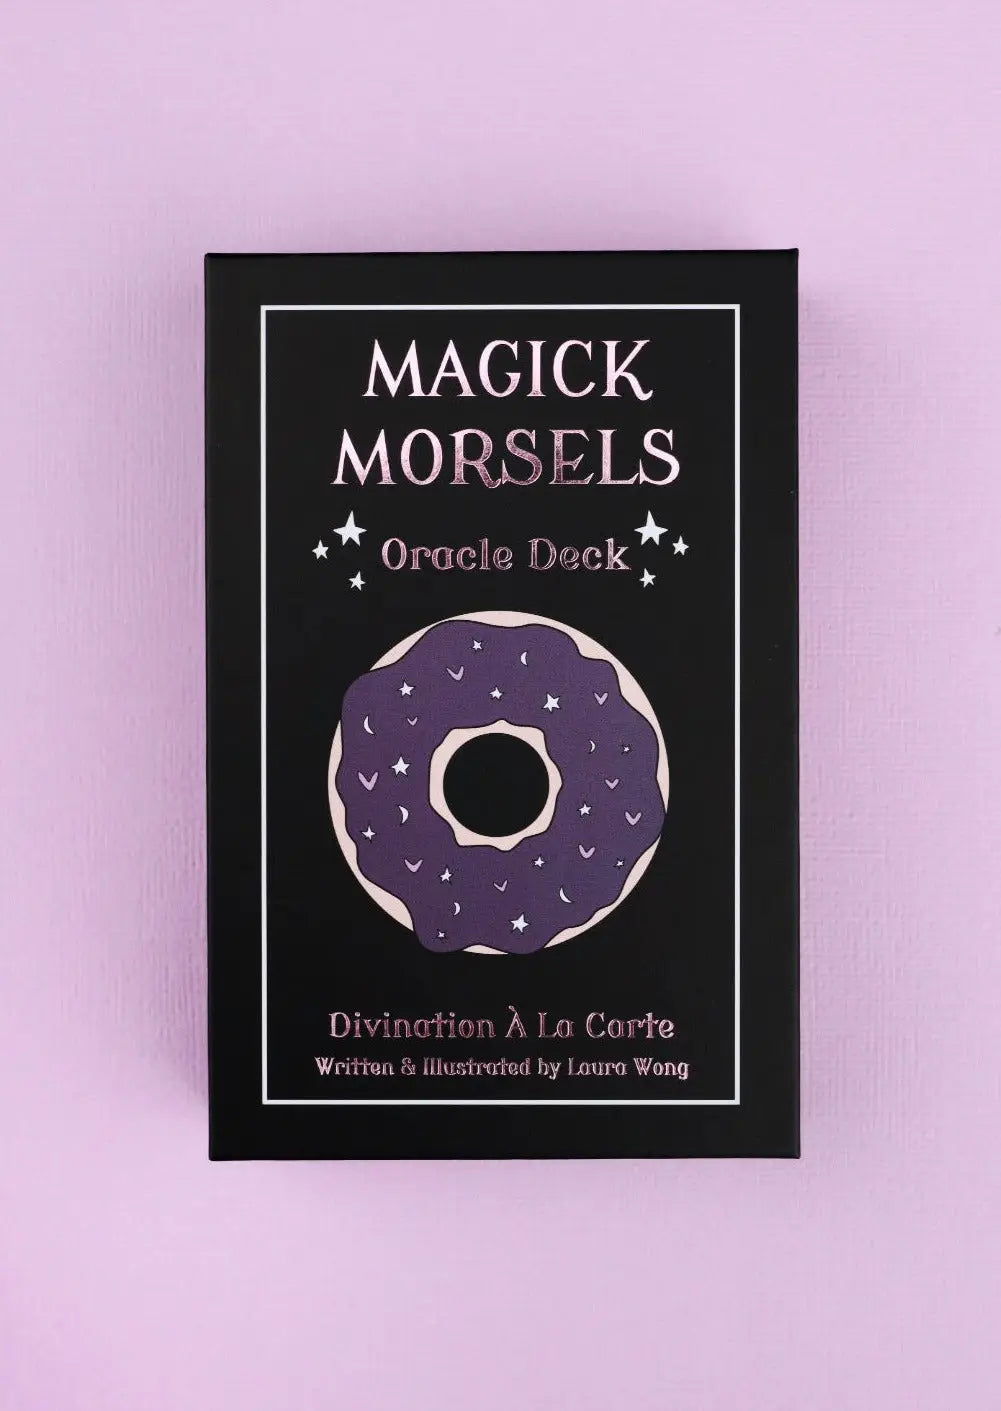 Magick Morsels Oracle Deck